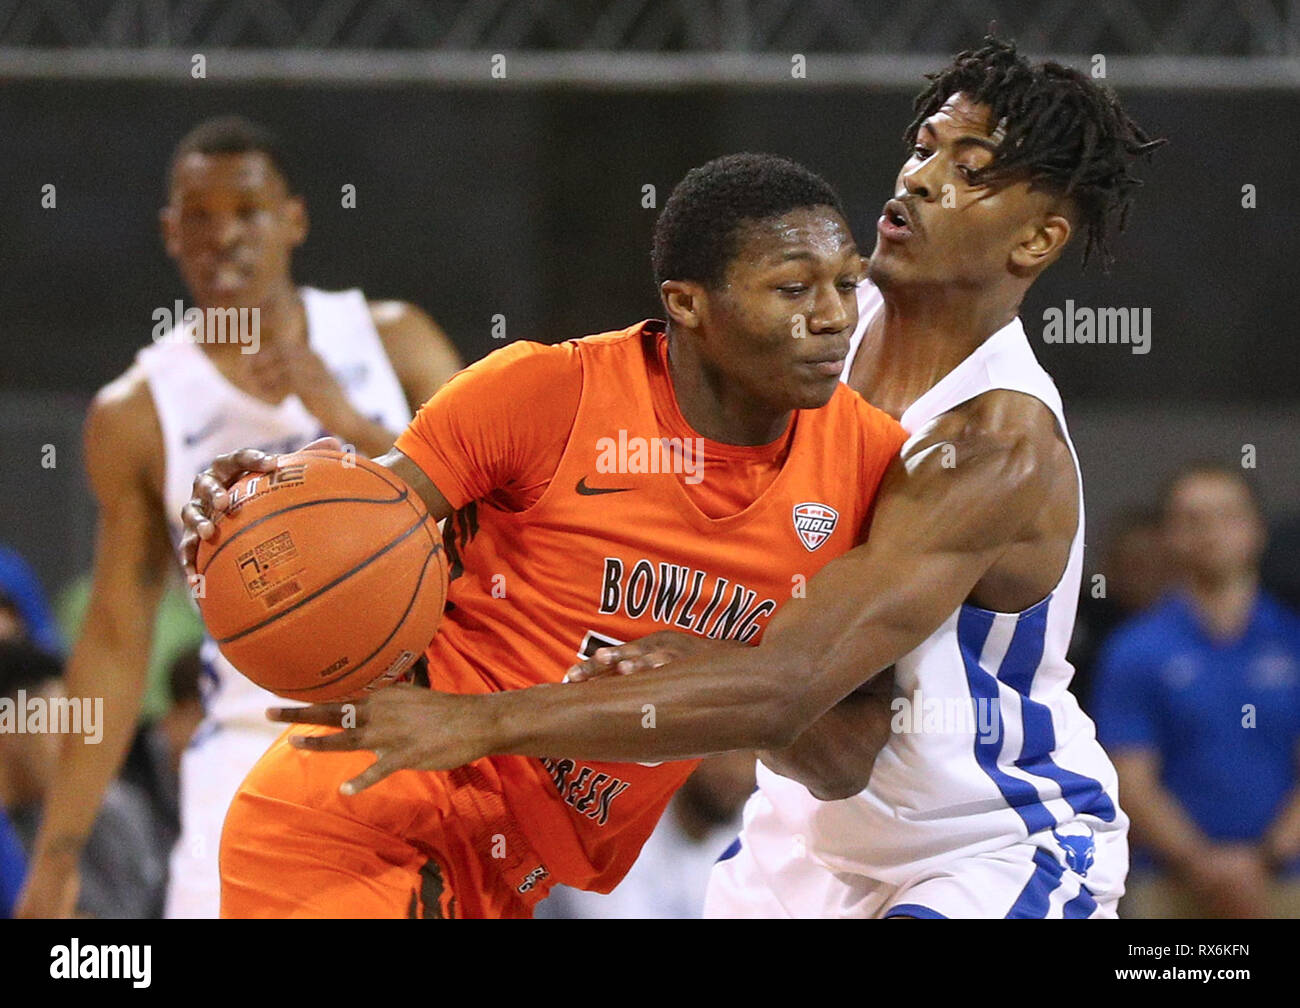 New York, USA. 8th Mar 2019. Mar 08, 2019: Bowling Green Falcons forward Daeqwon Plowden (25) shoulders his way into Buffalo Bulls forward Jeenathan Williams (11) during the first half of play in the NCAA Basketball game between the Bowling Green Falcons and Buffalo Bulls at Alumni Arena in Amherst, N.Y. (Nicholas T. LoVerde/Cal Sport Media) Credit: Cal Sport Media/Alamy Live News Stock Photo